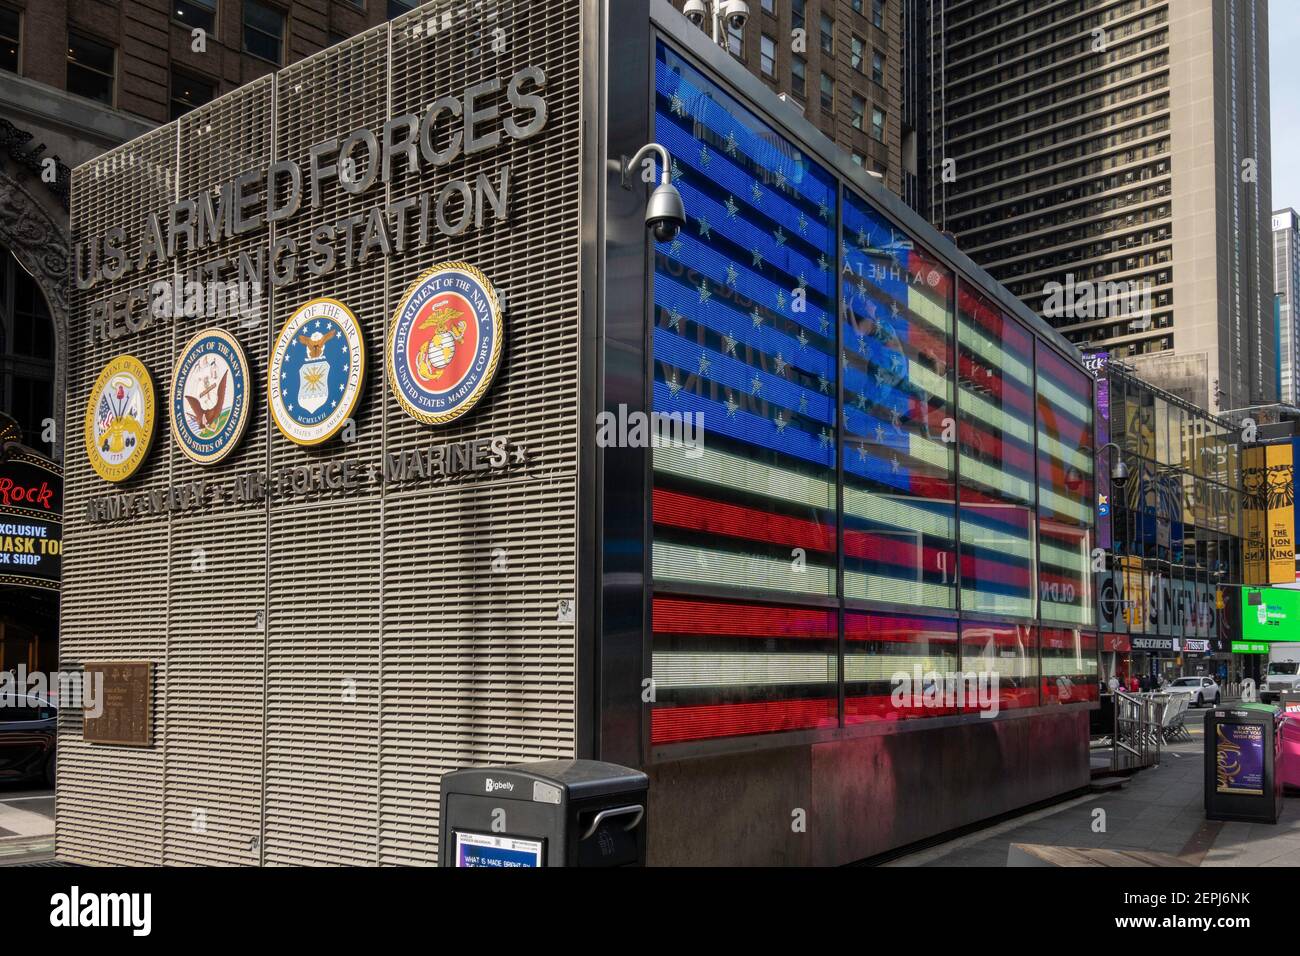 The Armed Forces Recruiting Station has been located in Times Square since 1946, New York City, USA Stock Photo